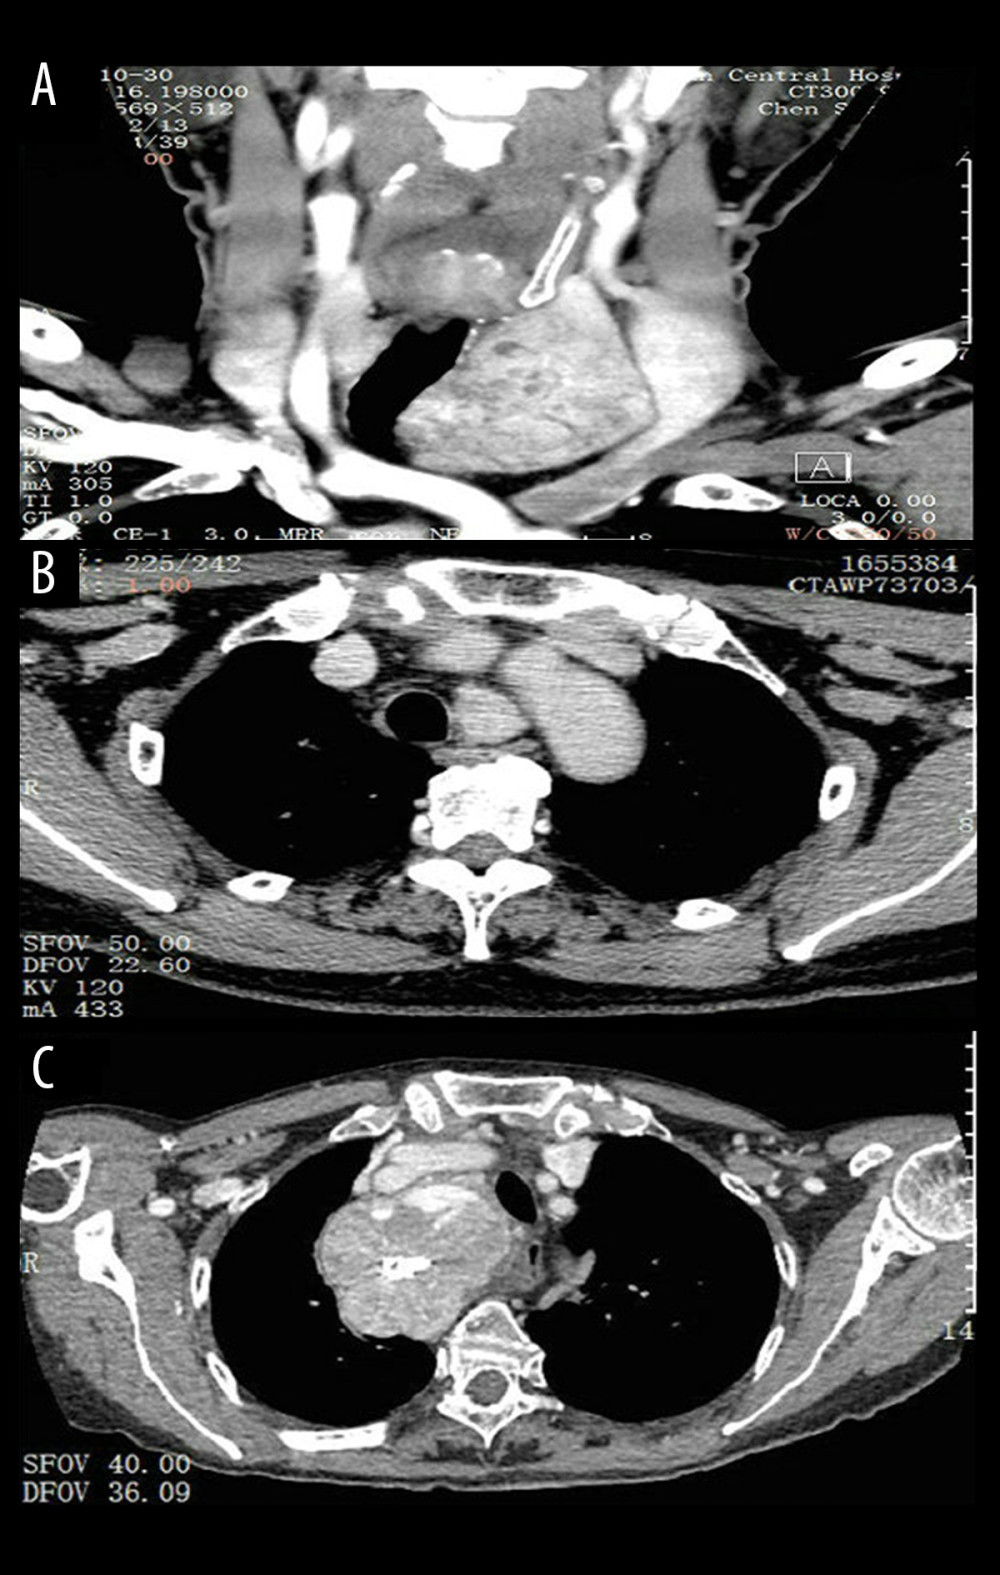 Three types of Retrosternal goiter are detected on computed tomographic (CT) scans. (A) Type I, after over half of the cervical goiter enters the sternum, the lower pole reaches the superior margin of the aortic arch; (B) Type II, the goiter is almost entirely posterior to the sternum, with the lower pole behind the aortic arch or entering the postmediastinum; (C) Type III, a huge intrathoracic goiter protrudes into the thorax, which may be accompanied by superior vena cava compression syndrome.